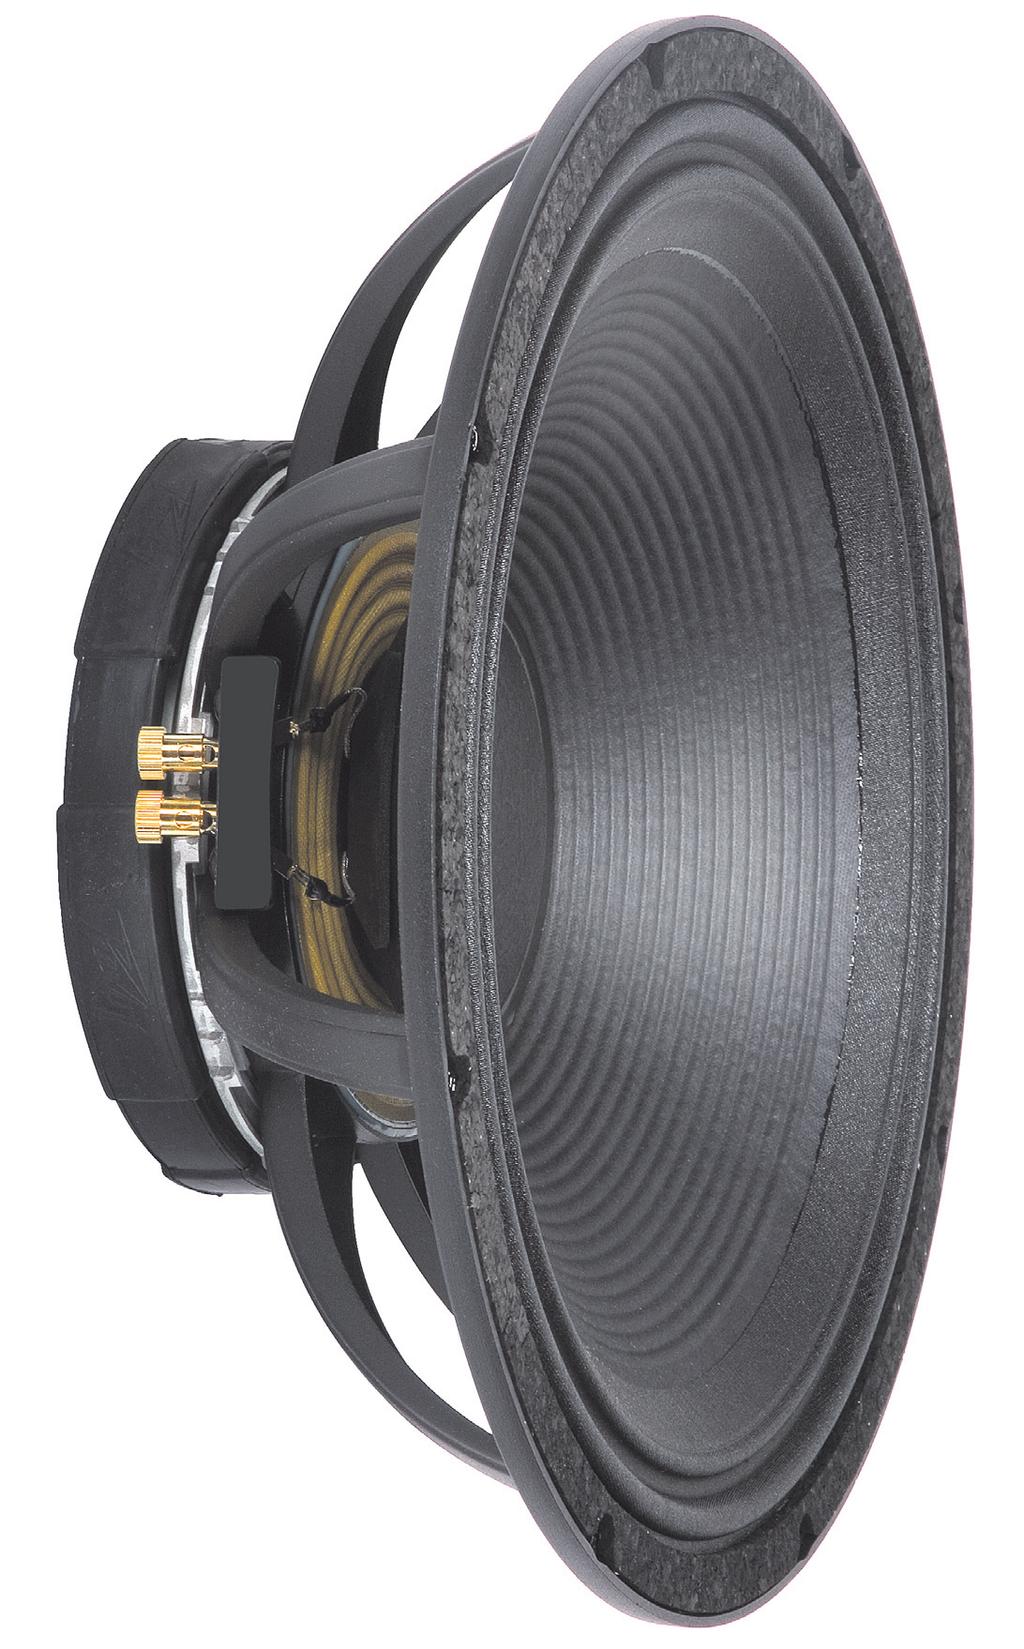 P E A V E Y E L E C T R O N I C S Peavey Low Rider 18 00560600 Peavey Low Rider 15 00560310 The Low Rider driver series represents a milestone in highpowered sub-woofer design.